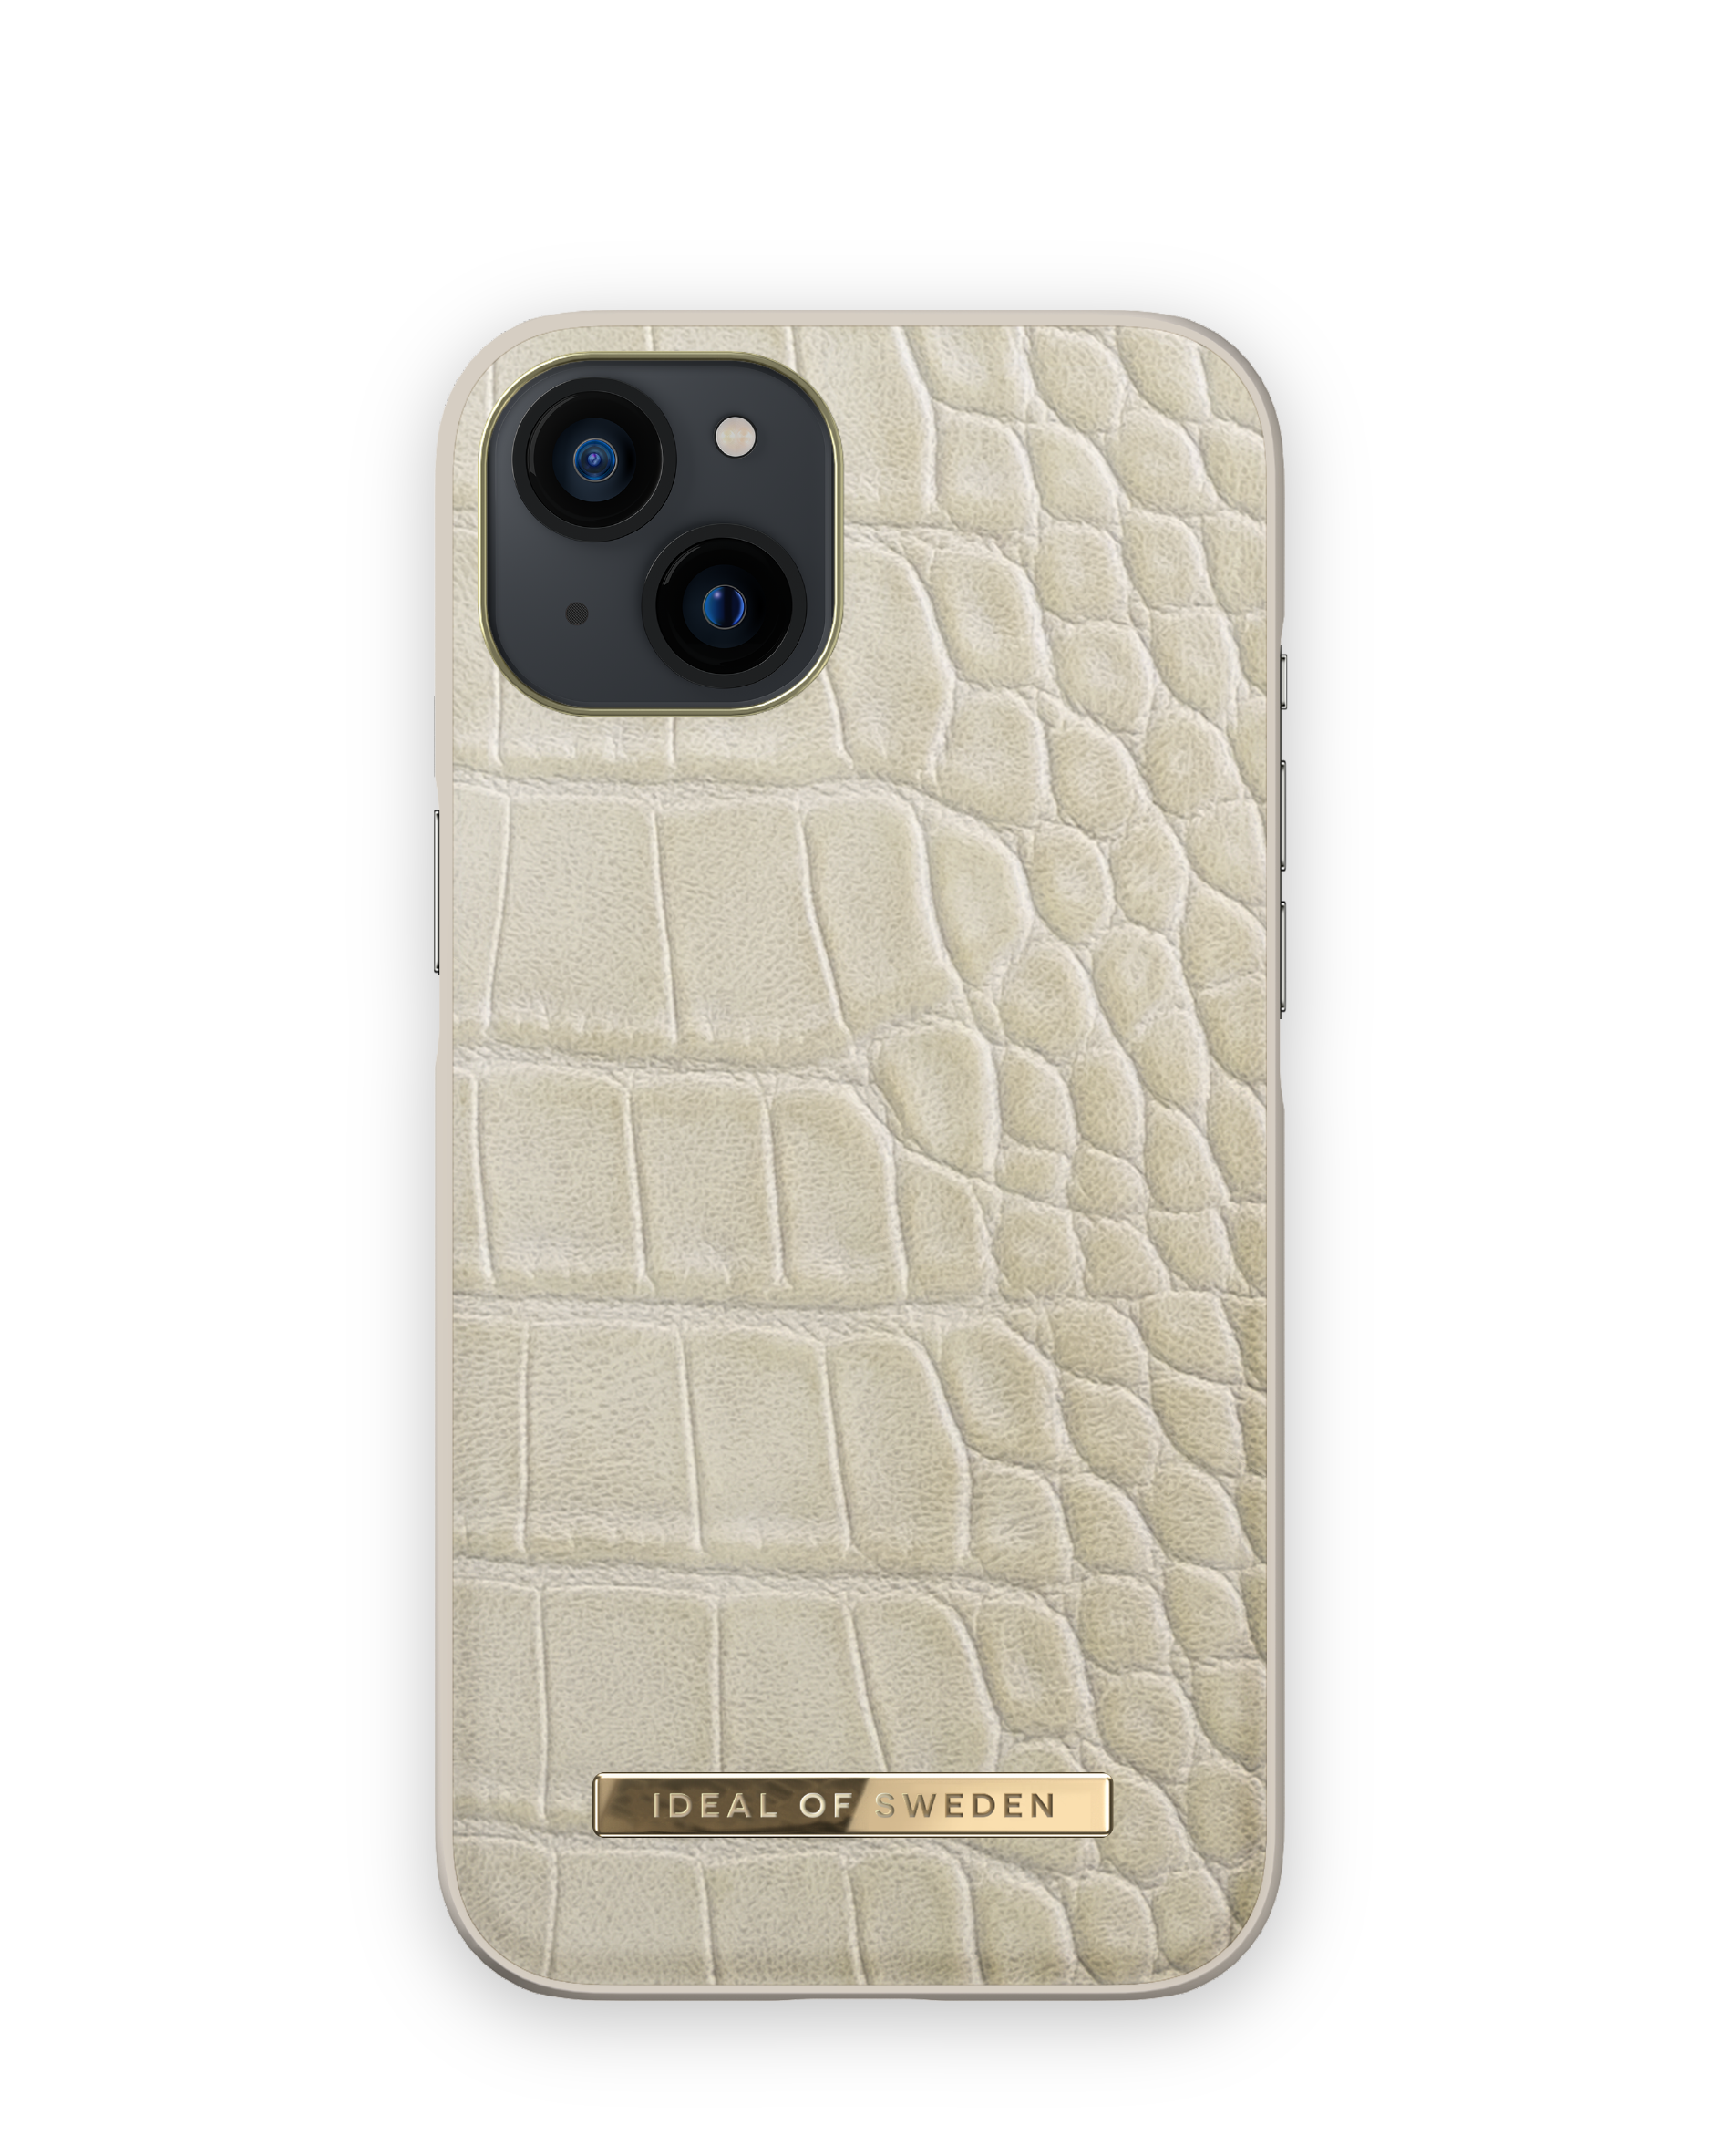 Backcover, 13, IDACAW20-I2161-243, Apple, Caramel iPhone SWEDEN Croco OF IDEAL